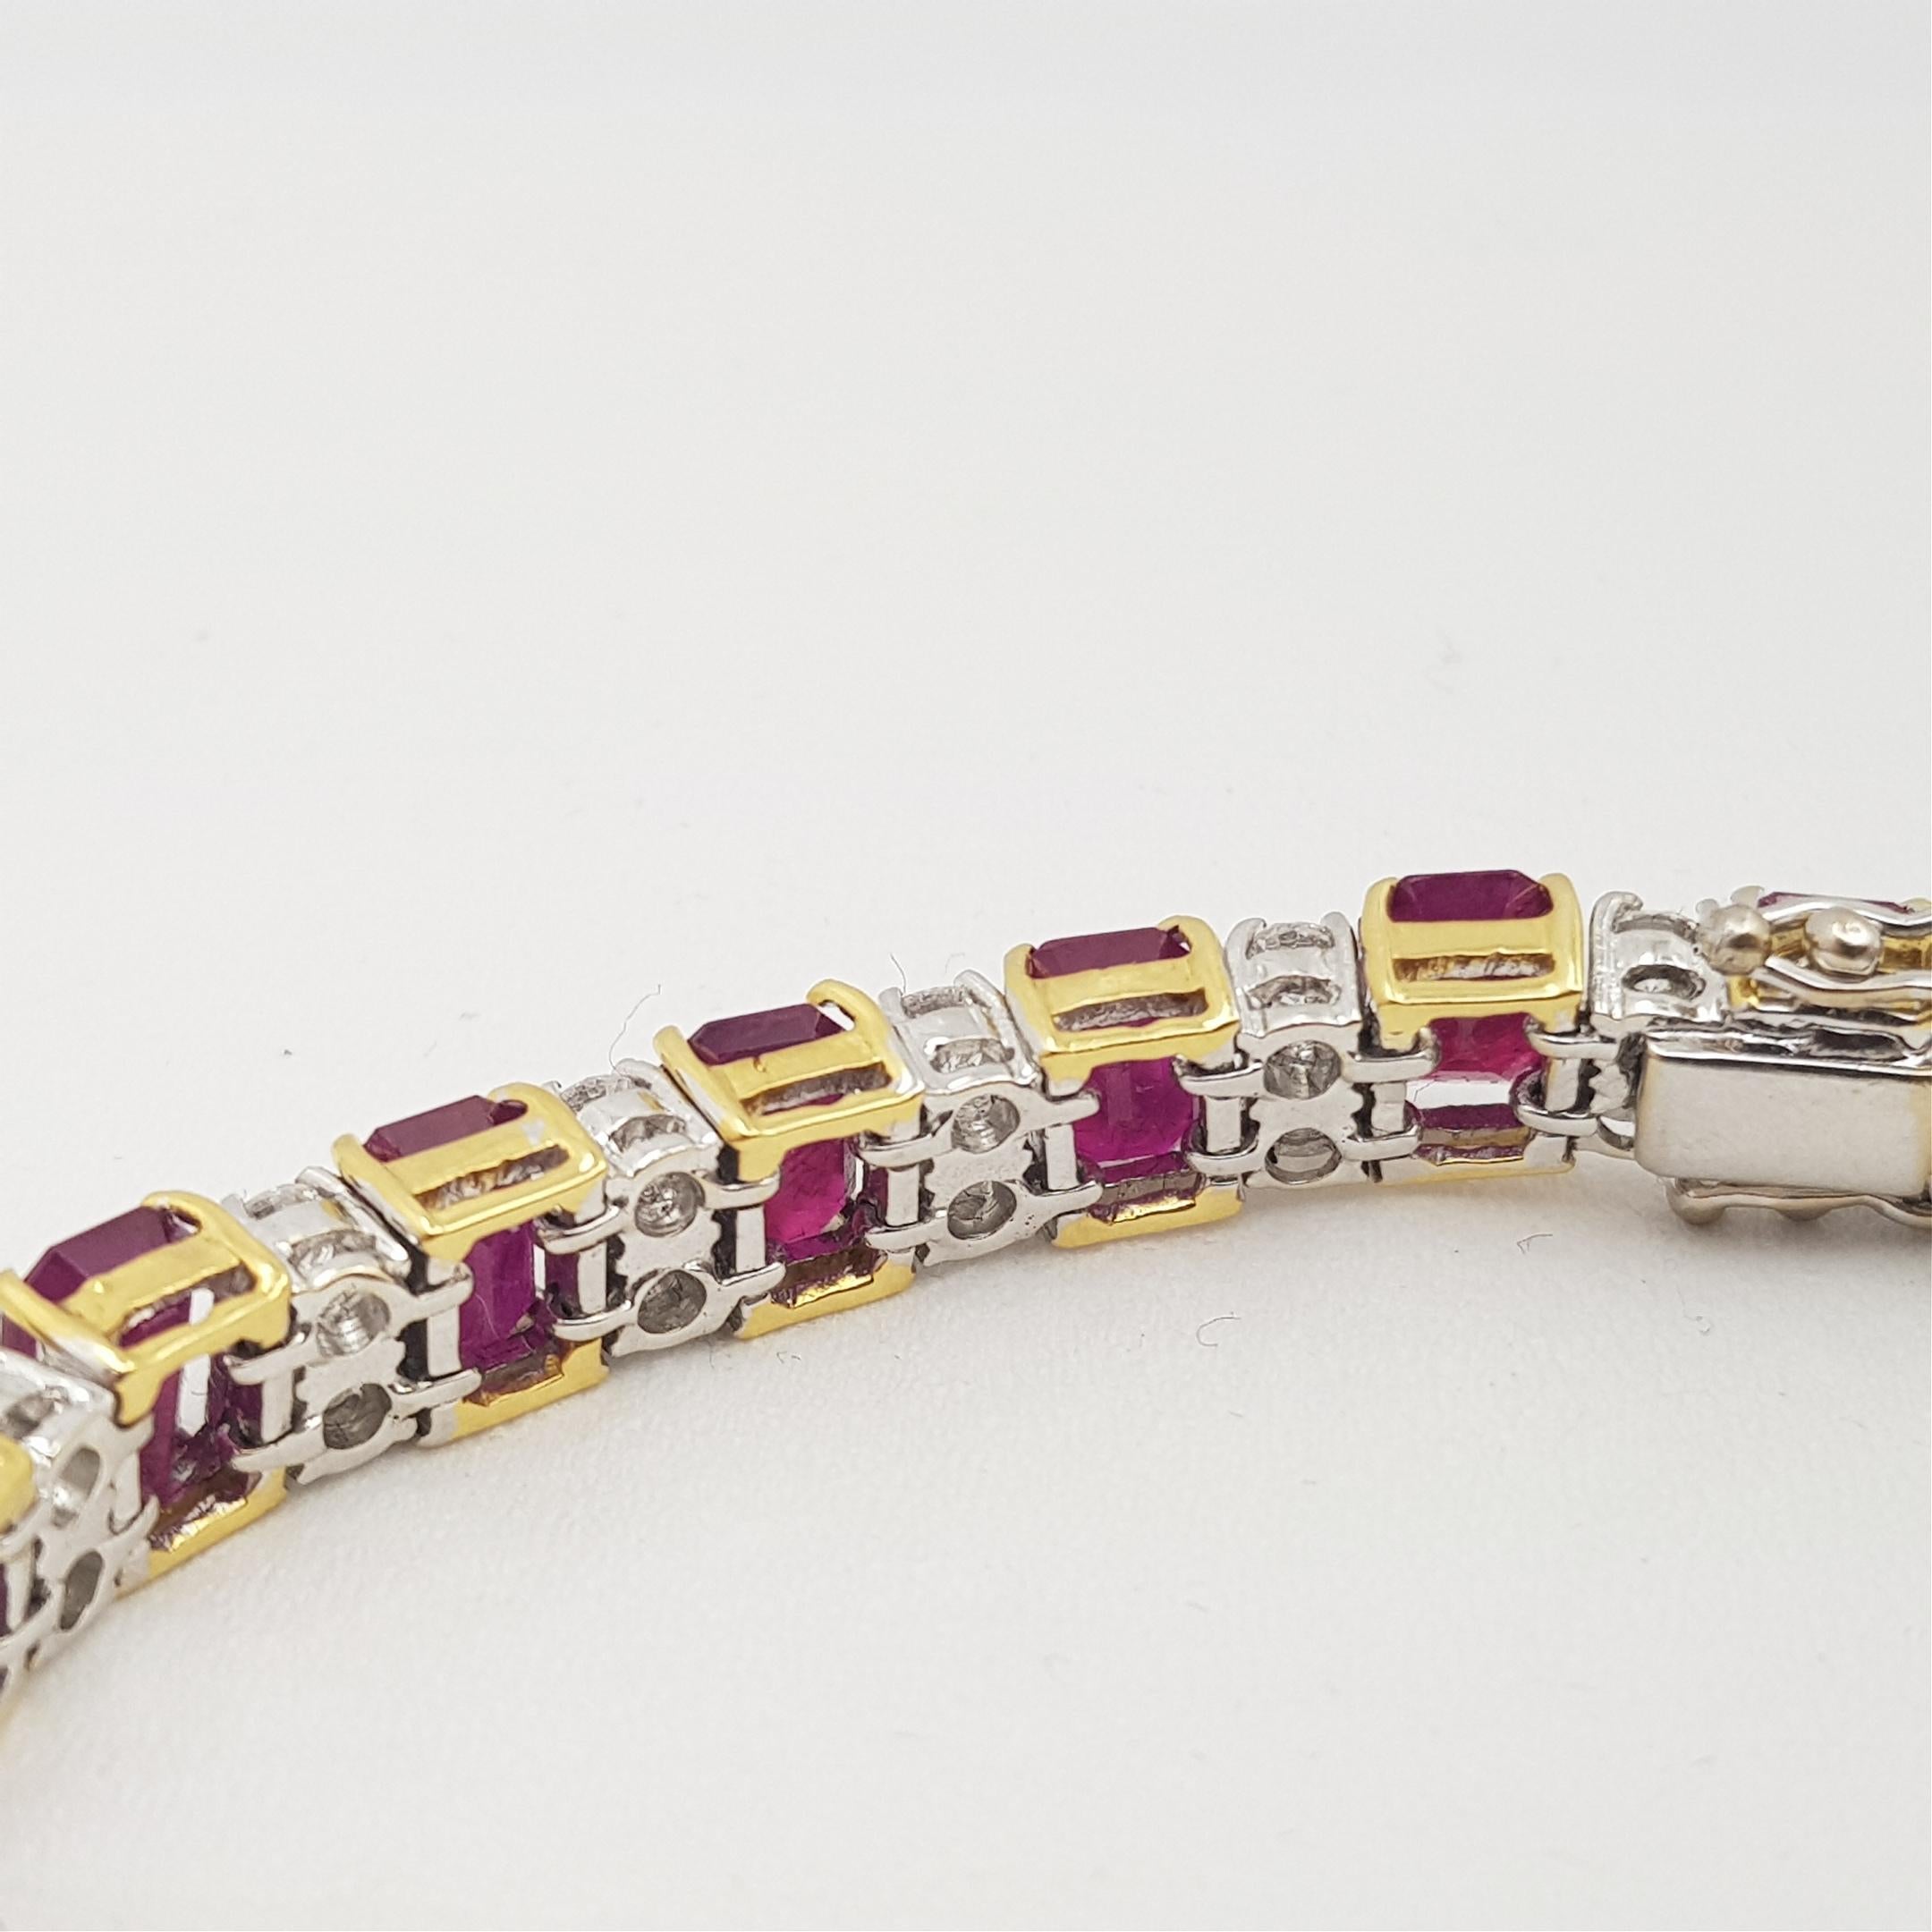 18ct Two Tone Gold Burmese Ruby & 4.5ct TW Diamond Bracelet Val $62765 AUD For Sale 1